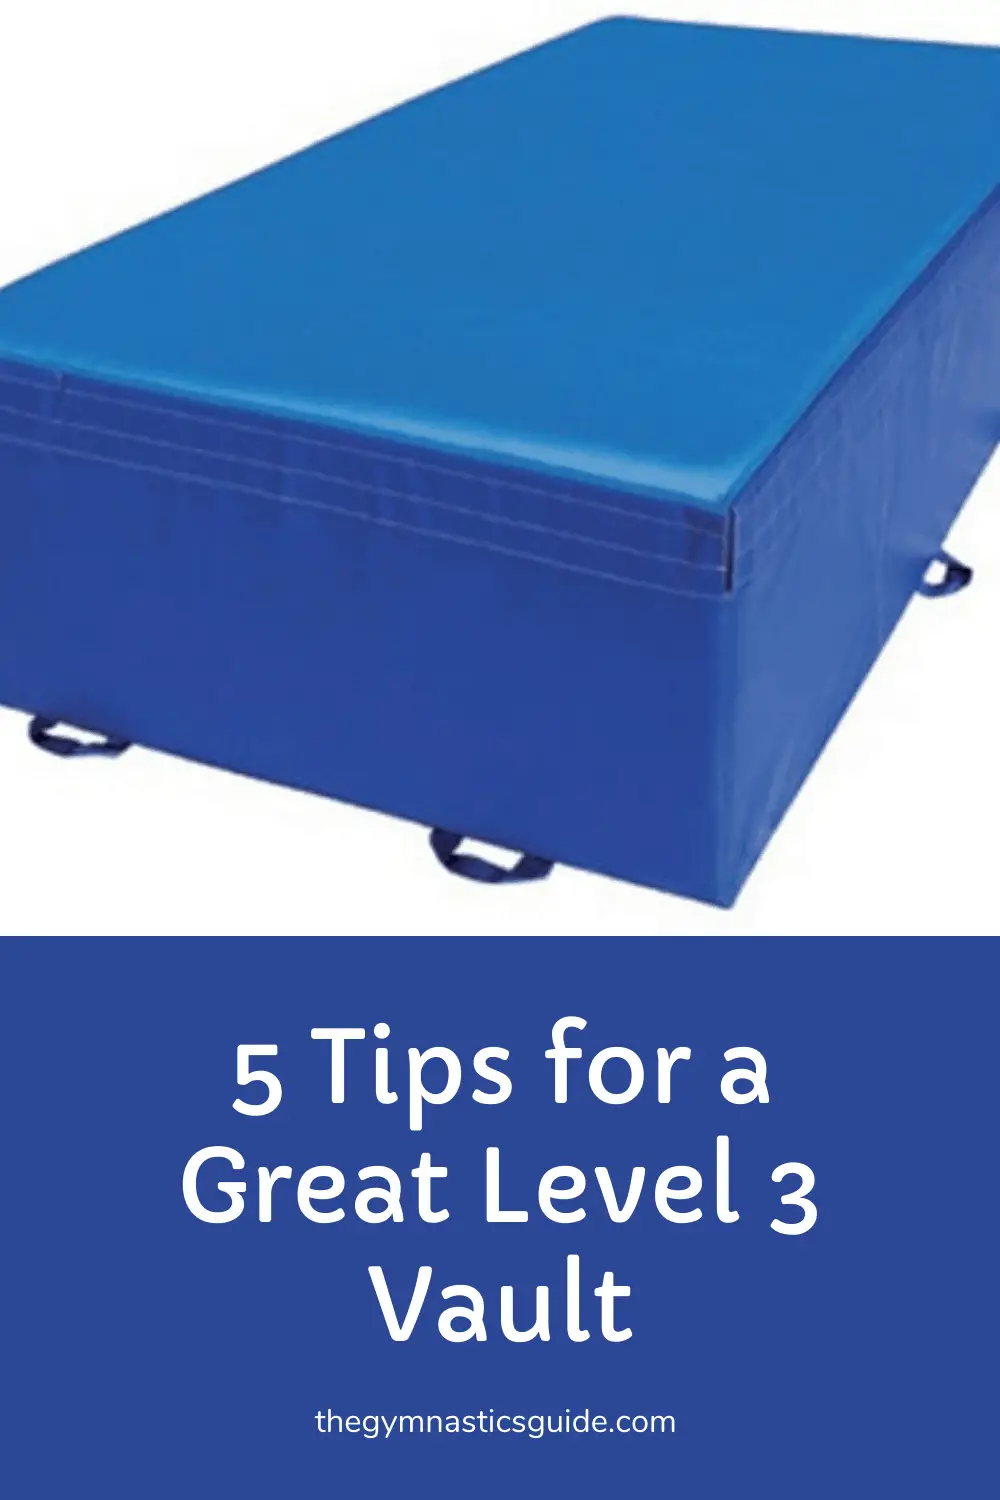 5 Tips for a Great Level 2 Vault